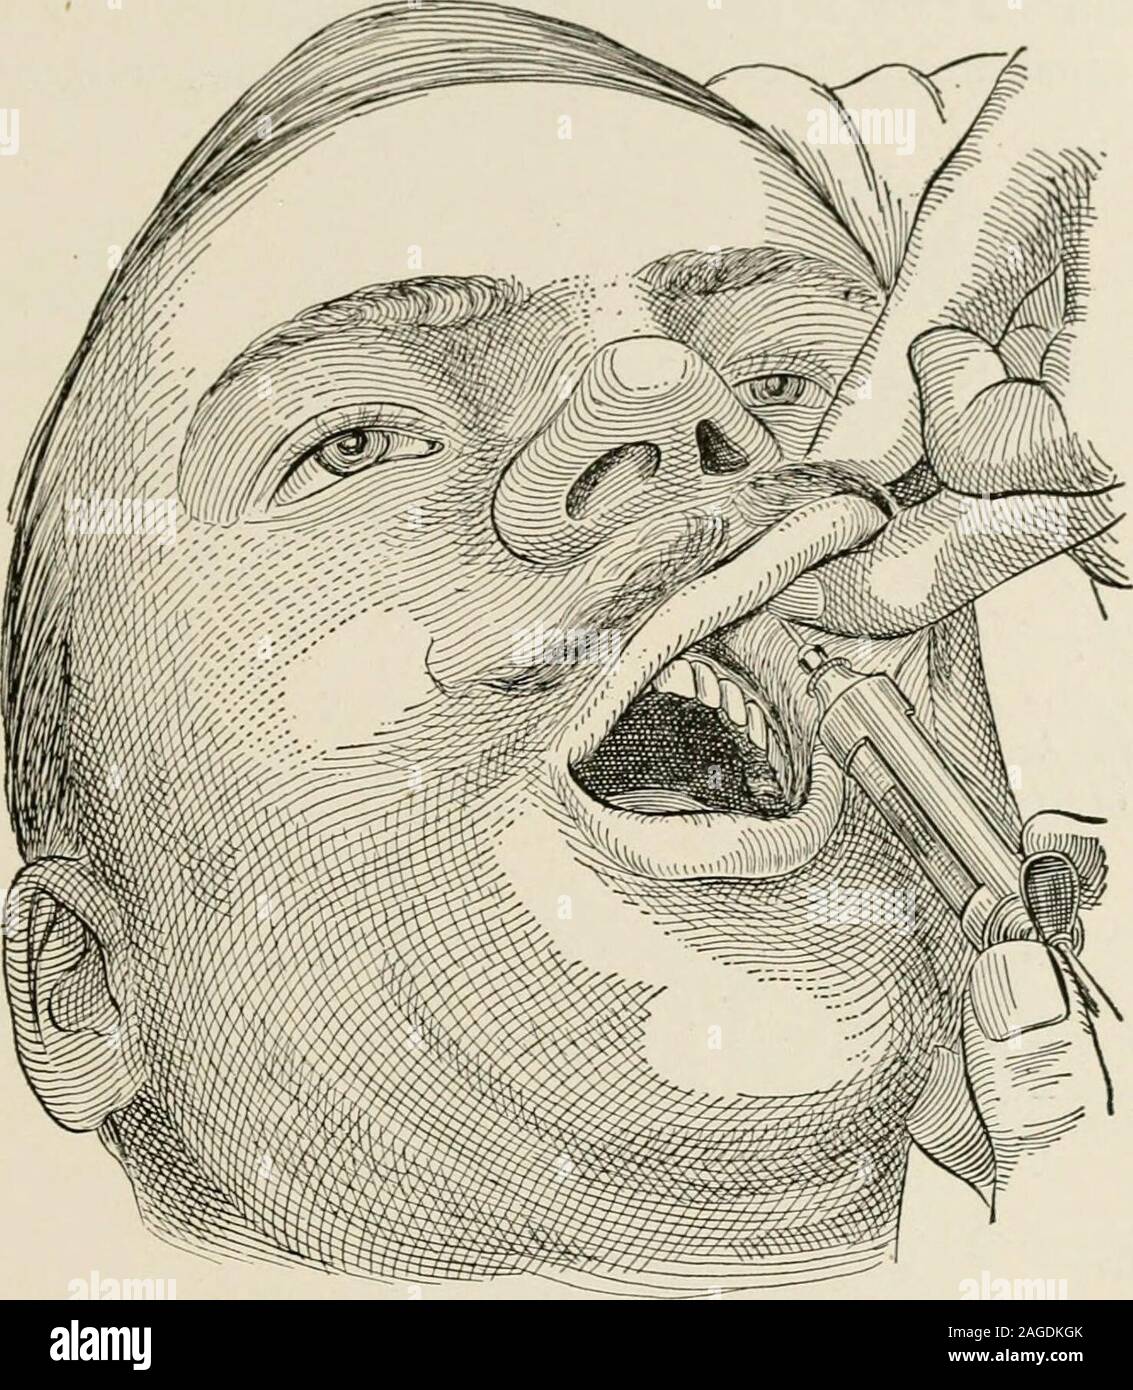 . Local and regional anesthesia; with chapters on spinal, epidural, paravertebral, and parasacral analgesia, and other applications of local and regional anesthesia to the surgery of the eye, ear, nose and throat, and to dental practice. Fig. 162.—The supra-orbital foramen is located at the junction of the inner andmiddle thirds of the supra-orbital margin; a line drawn from this point, passing betweenthe two bicuspids of the upper and lower jaw, should pass over the infra-orbital and men-tal foramina. (After Sobotta and McMurrich.) inner angle of the face; if a wall of anesthesia is now carri Stock Photo